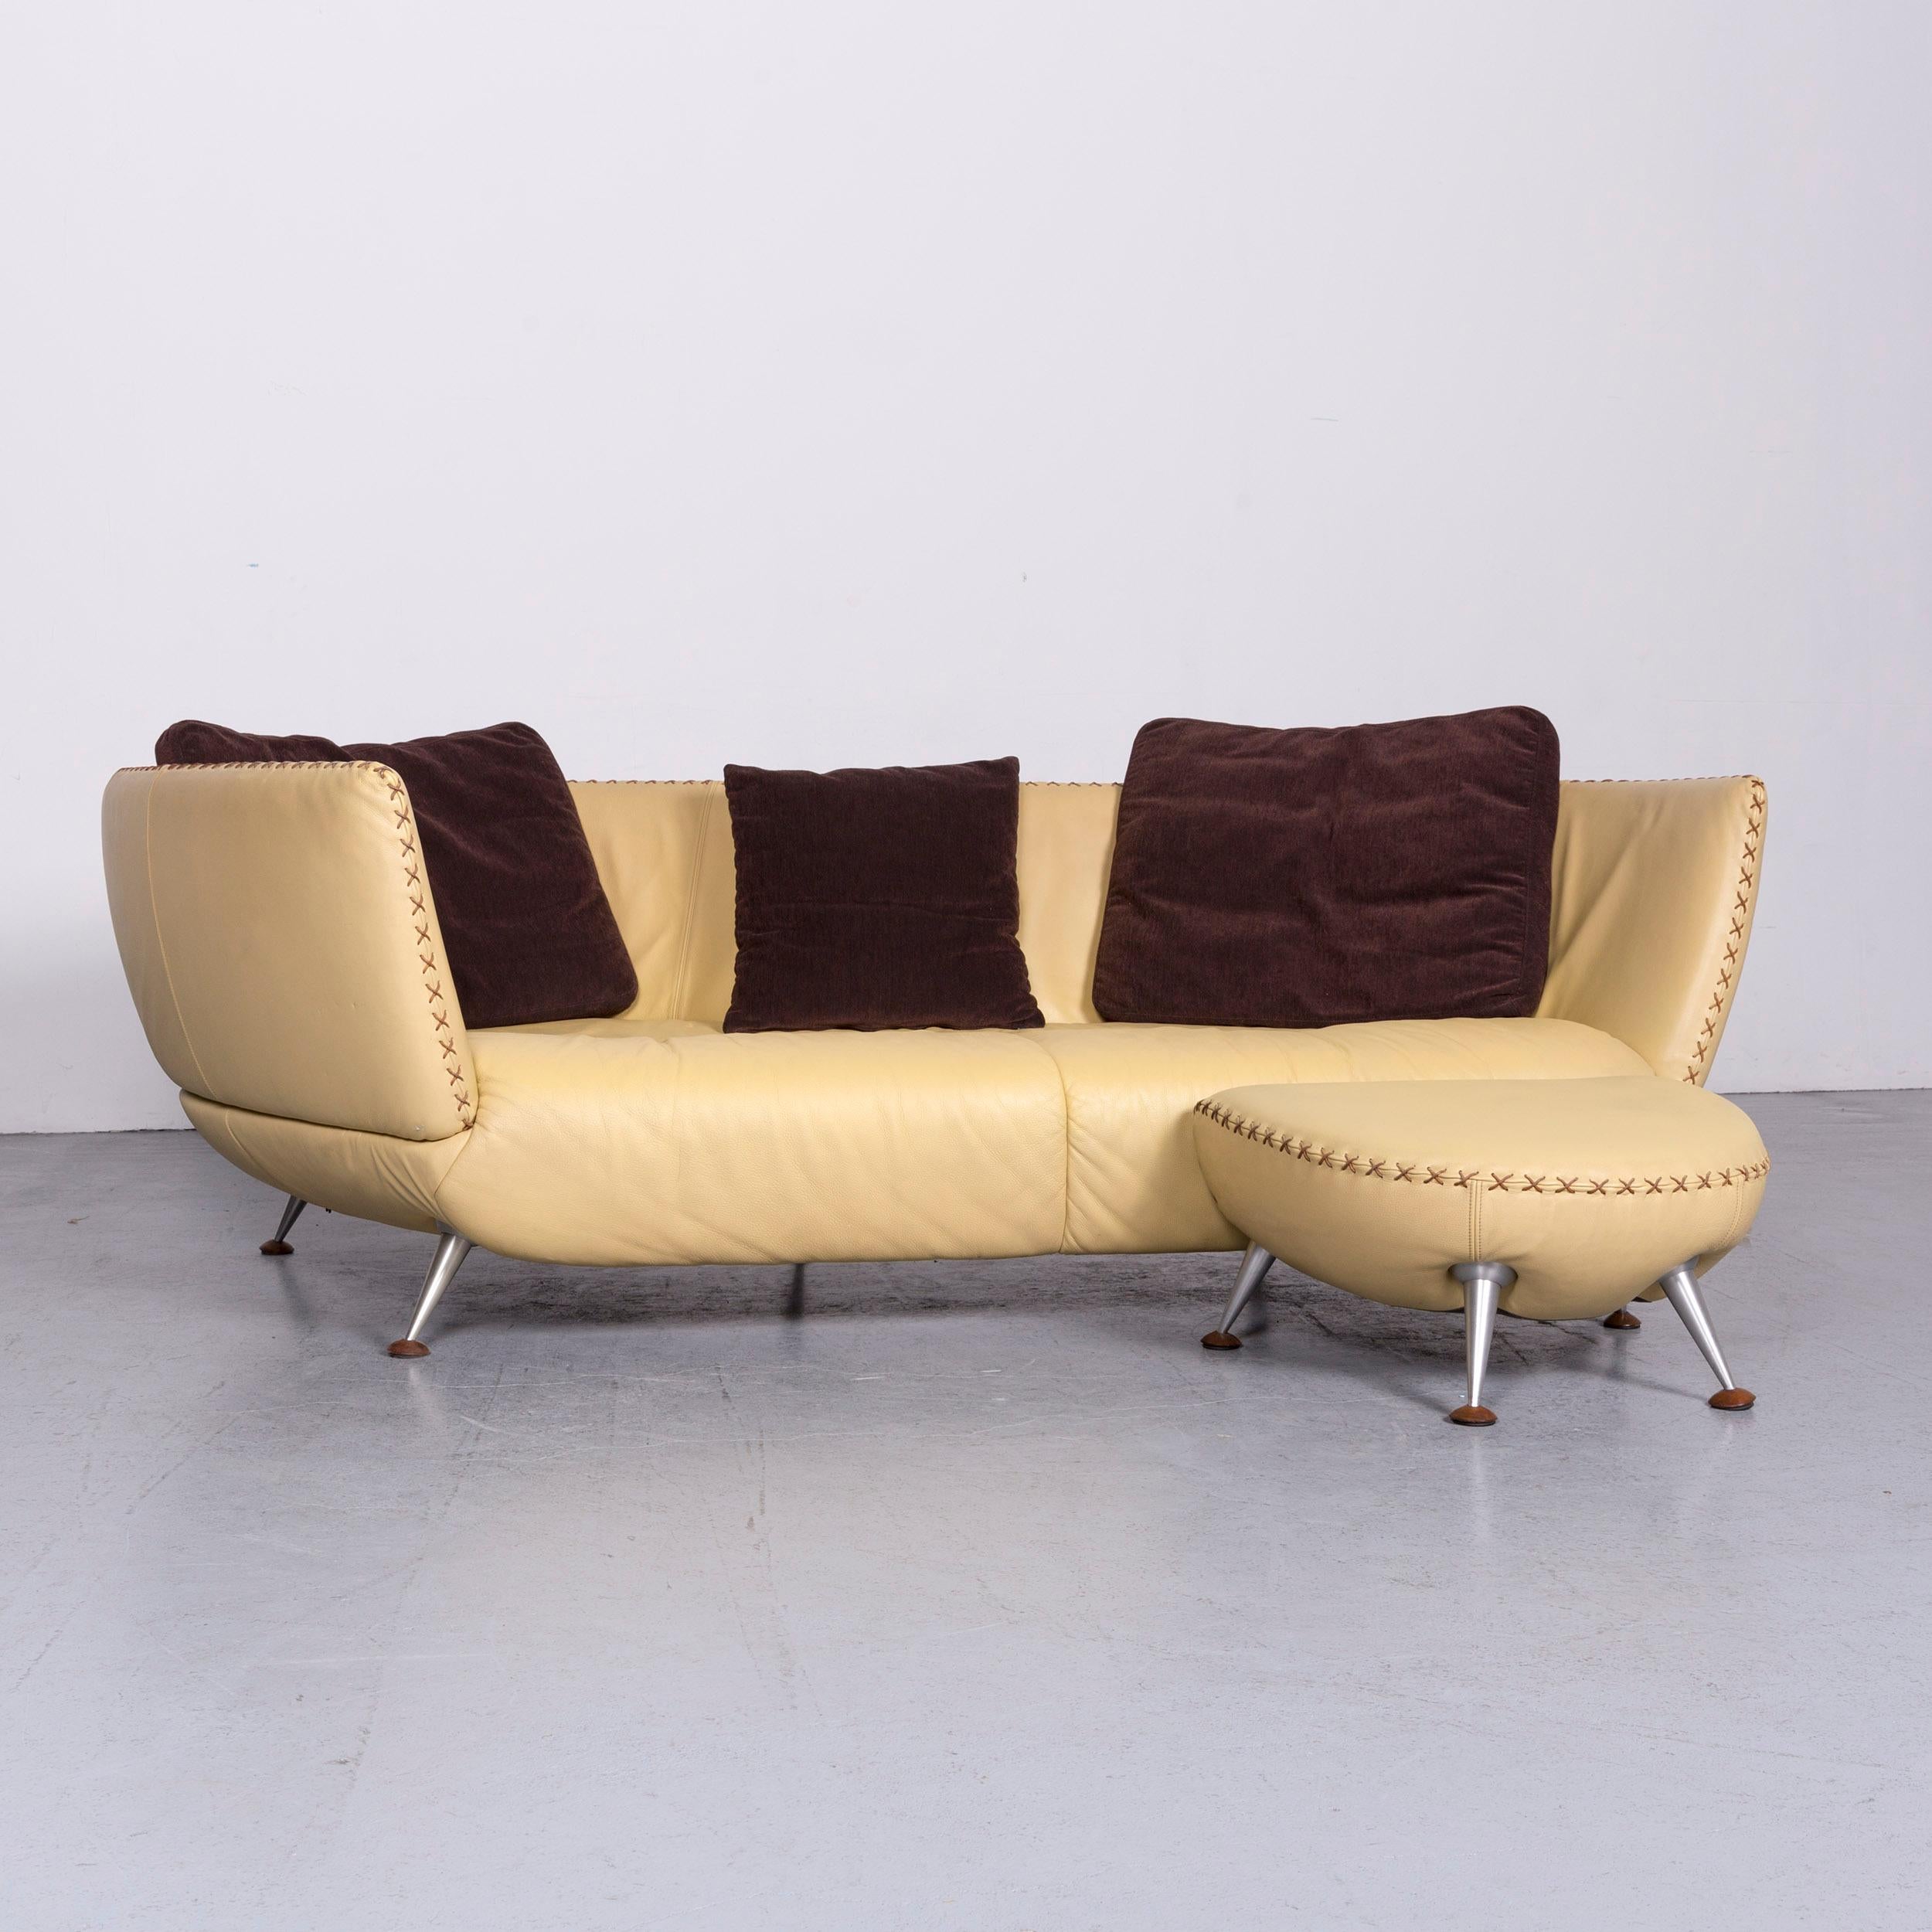 We bring to you an De Sede Ds 102 designer leather sofa beige three-seat couch with footstool.